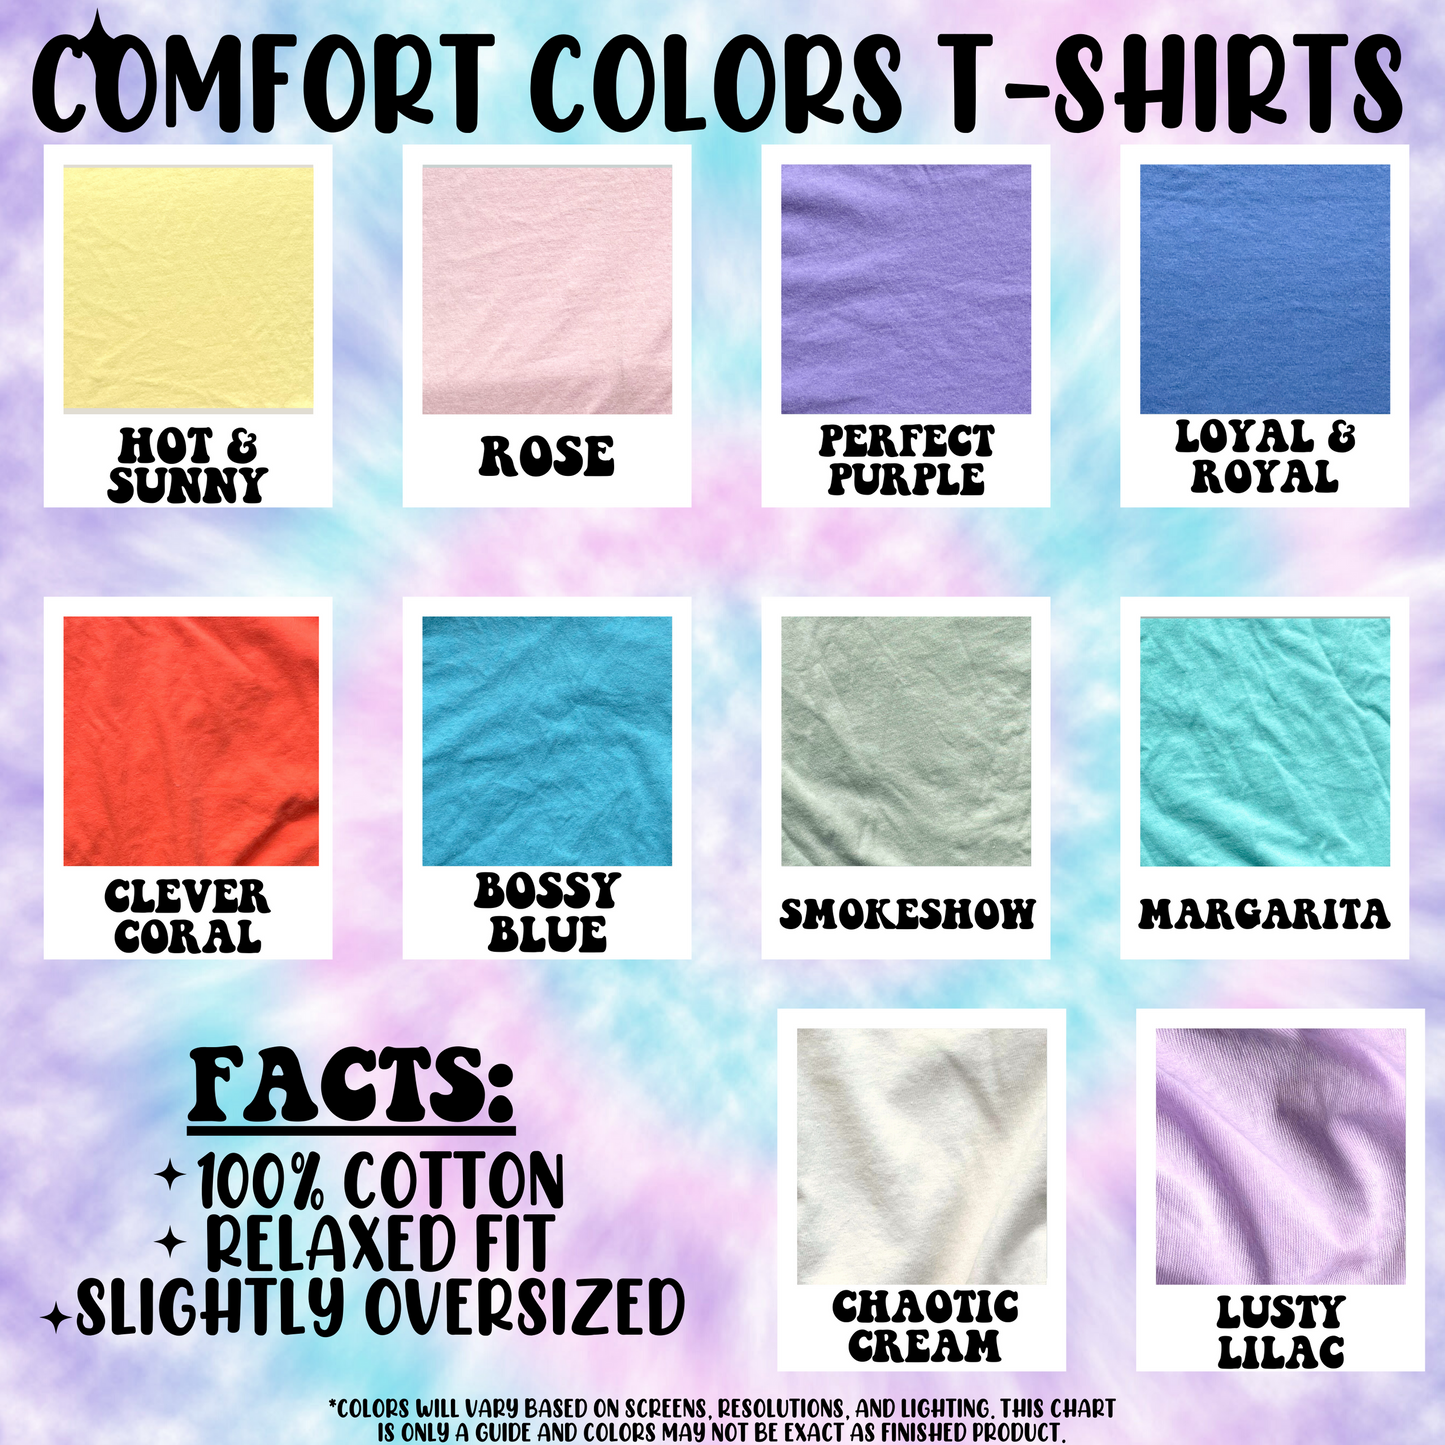 You are a Headache Comfort Colors Tee